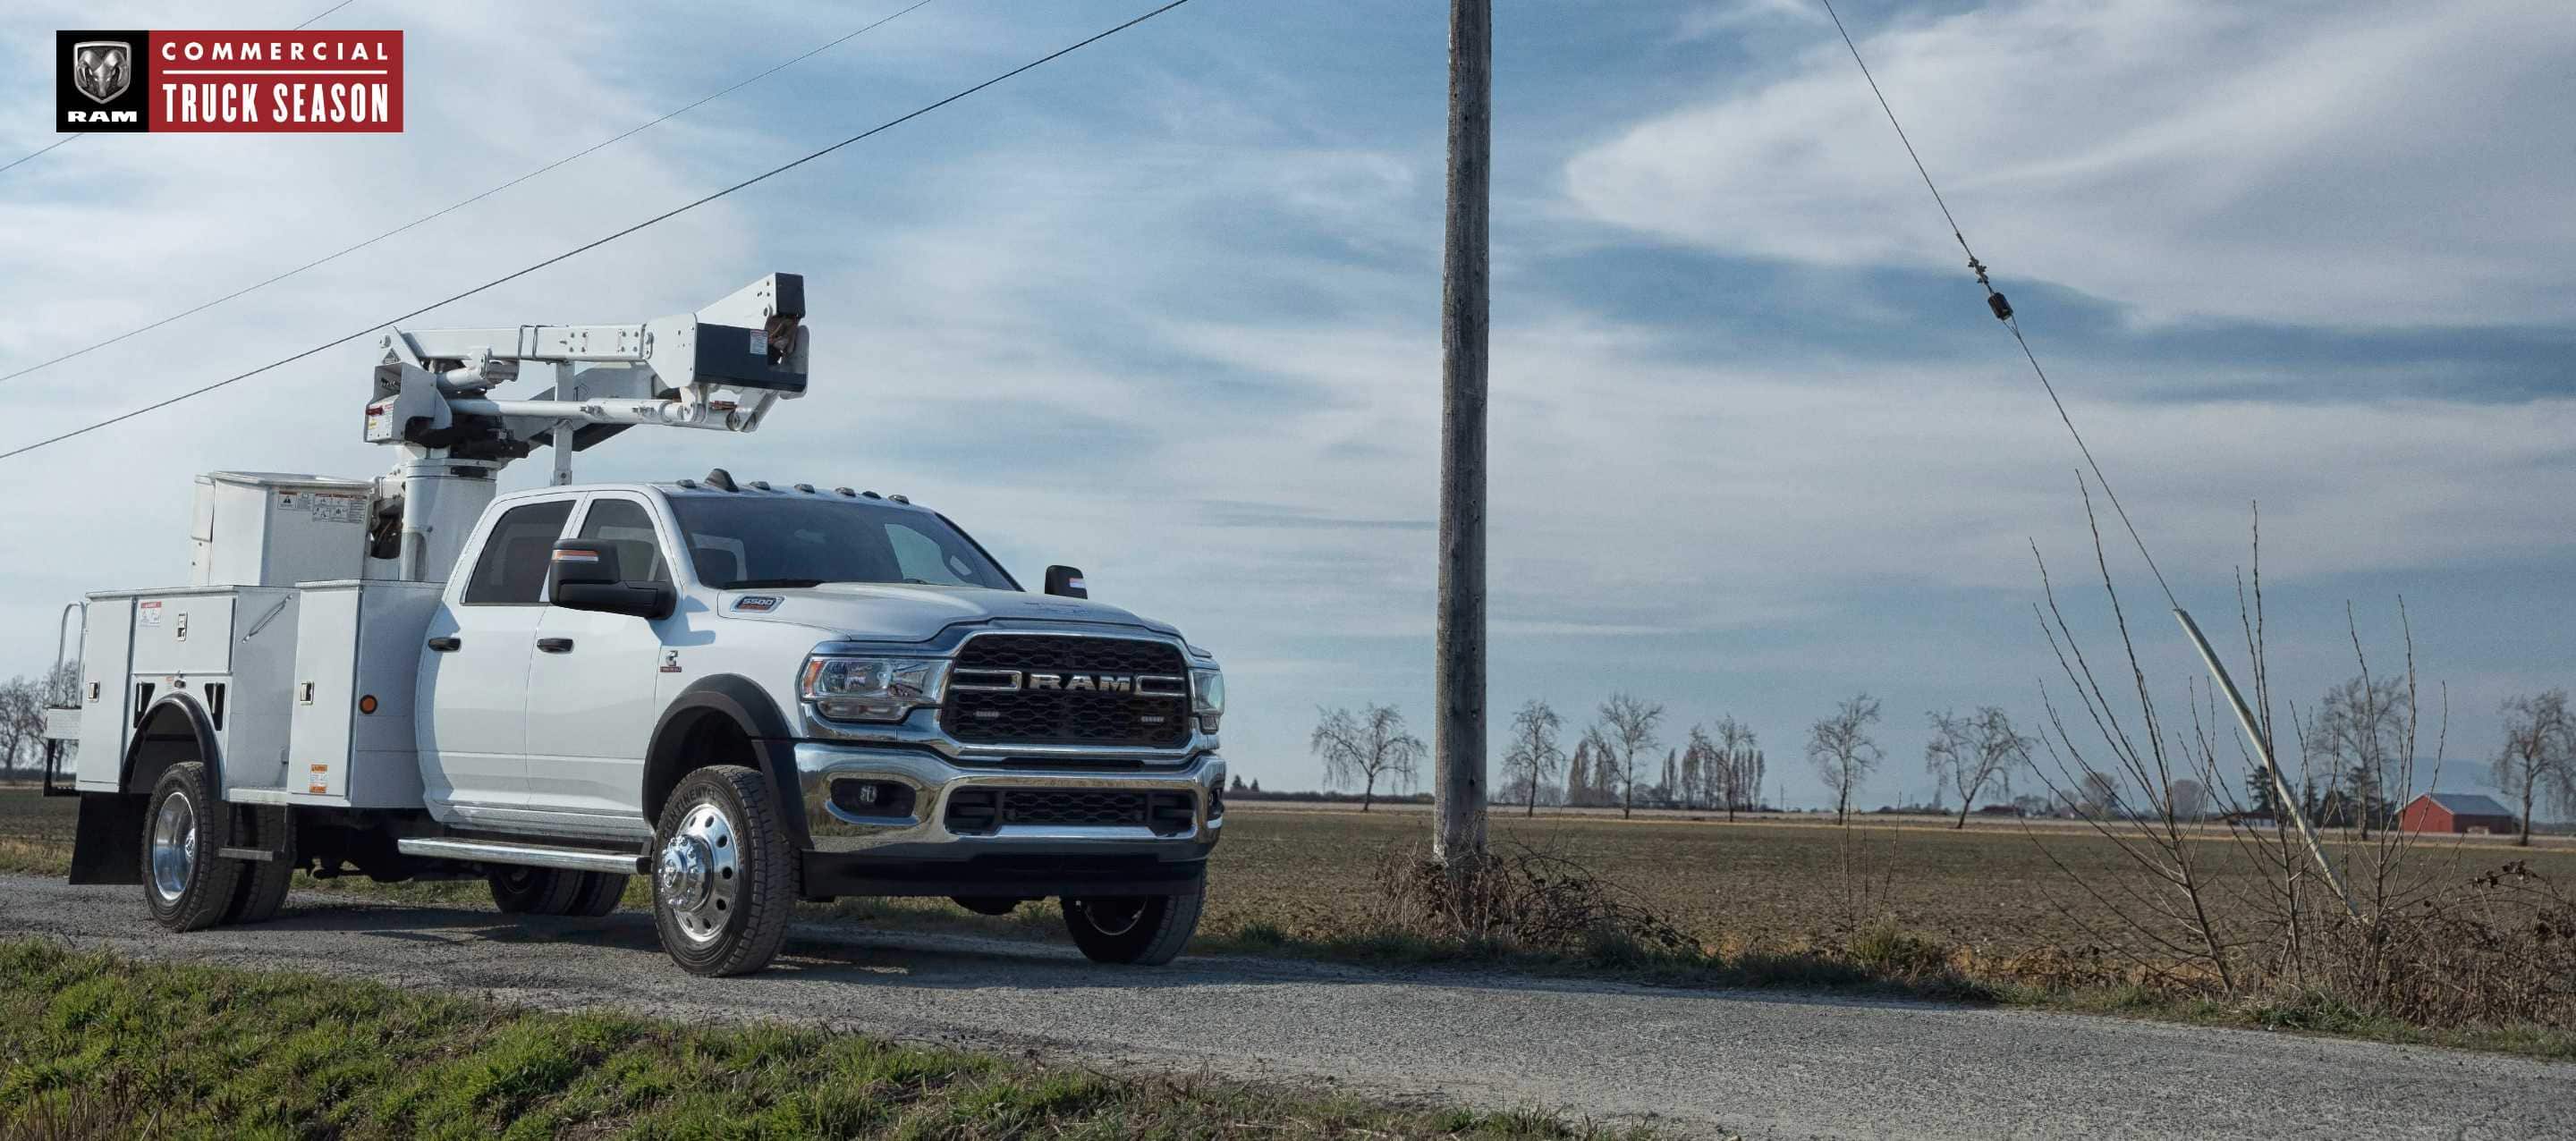 A white 2023 Ram 5500 Tradesman Chassis Crew Cab 4x2 with a utility upfit, parked on a country road beside a utility pole with storm clouds overhead. Commercial Truck Season.